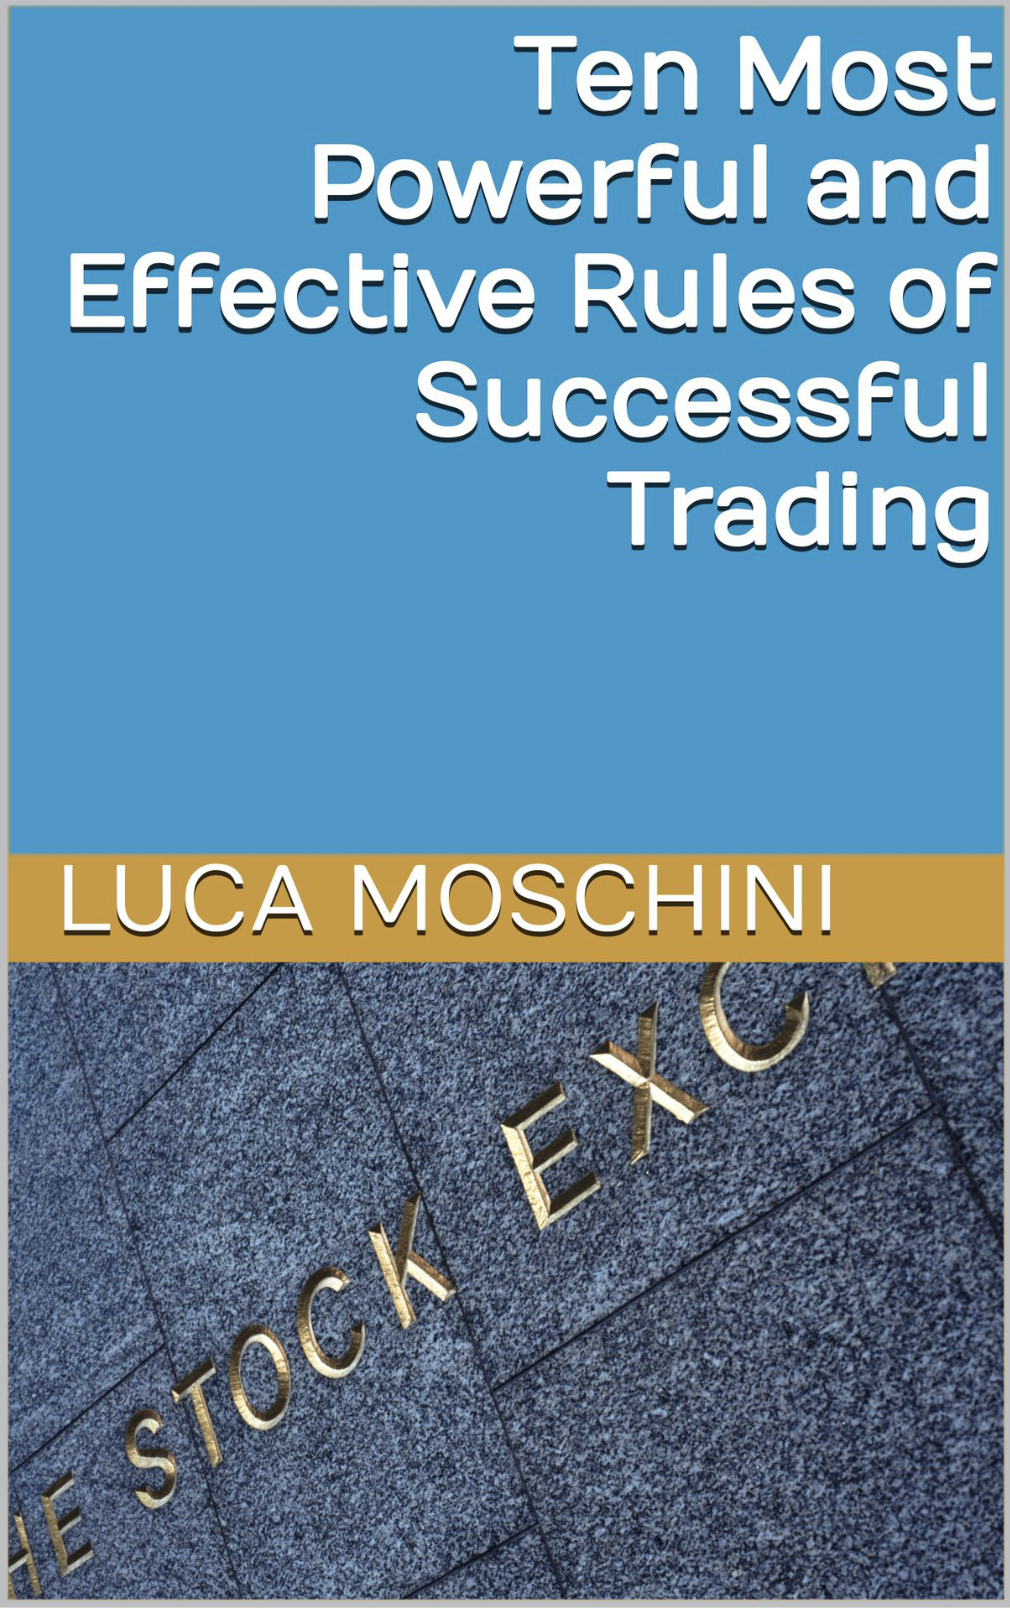 Ten Most Powerful and Effective Rules of Successful Trading ebook